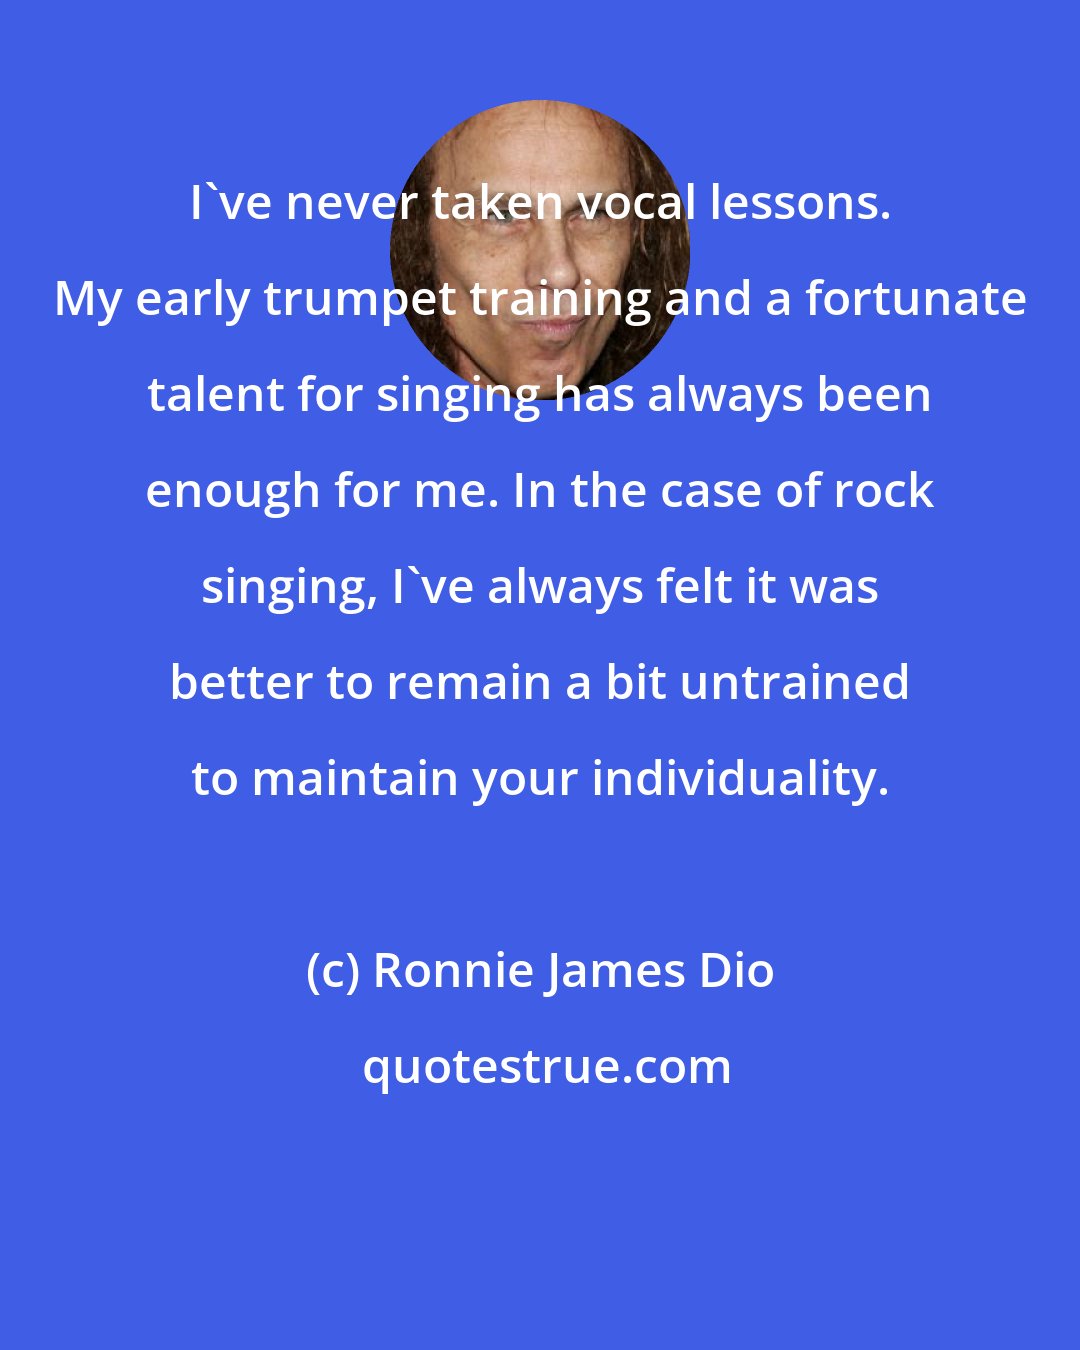 Ronnie James Dio: I've never taken vocal lessons. My early trumpet training and a fortunate talent for singing has always been enough for me. In the case of rock singing, I've always felt it was better to remain a bit untrained to maintain your individuality.